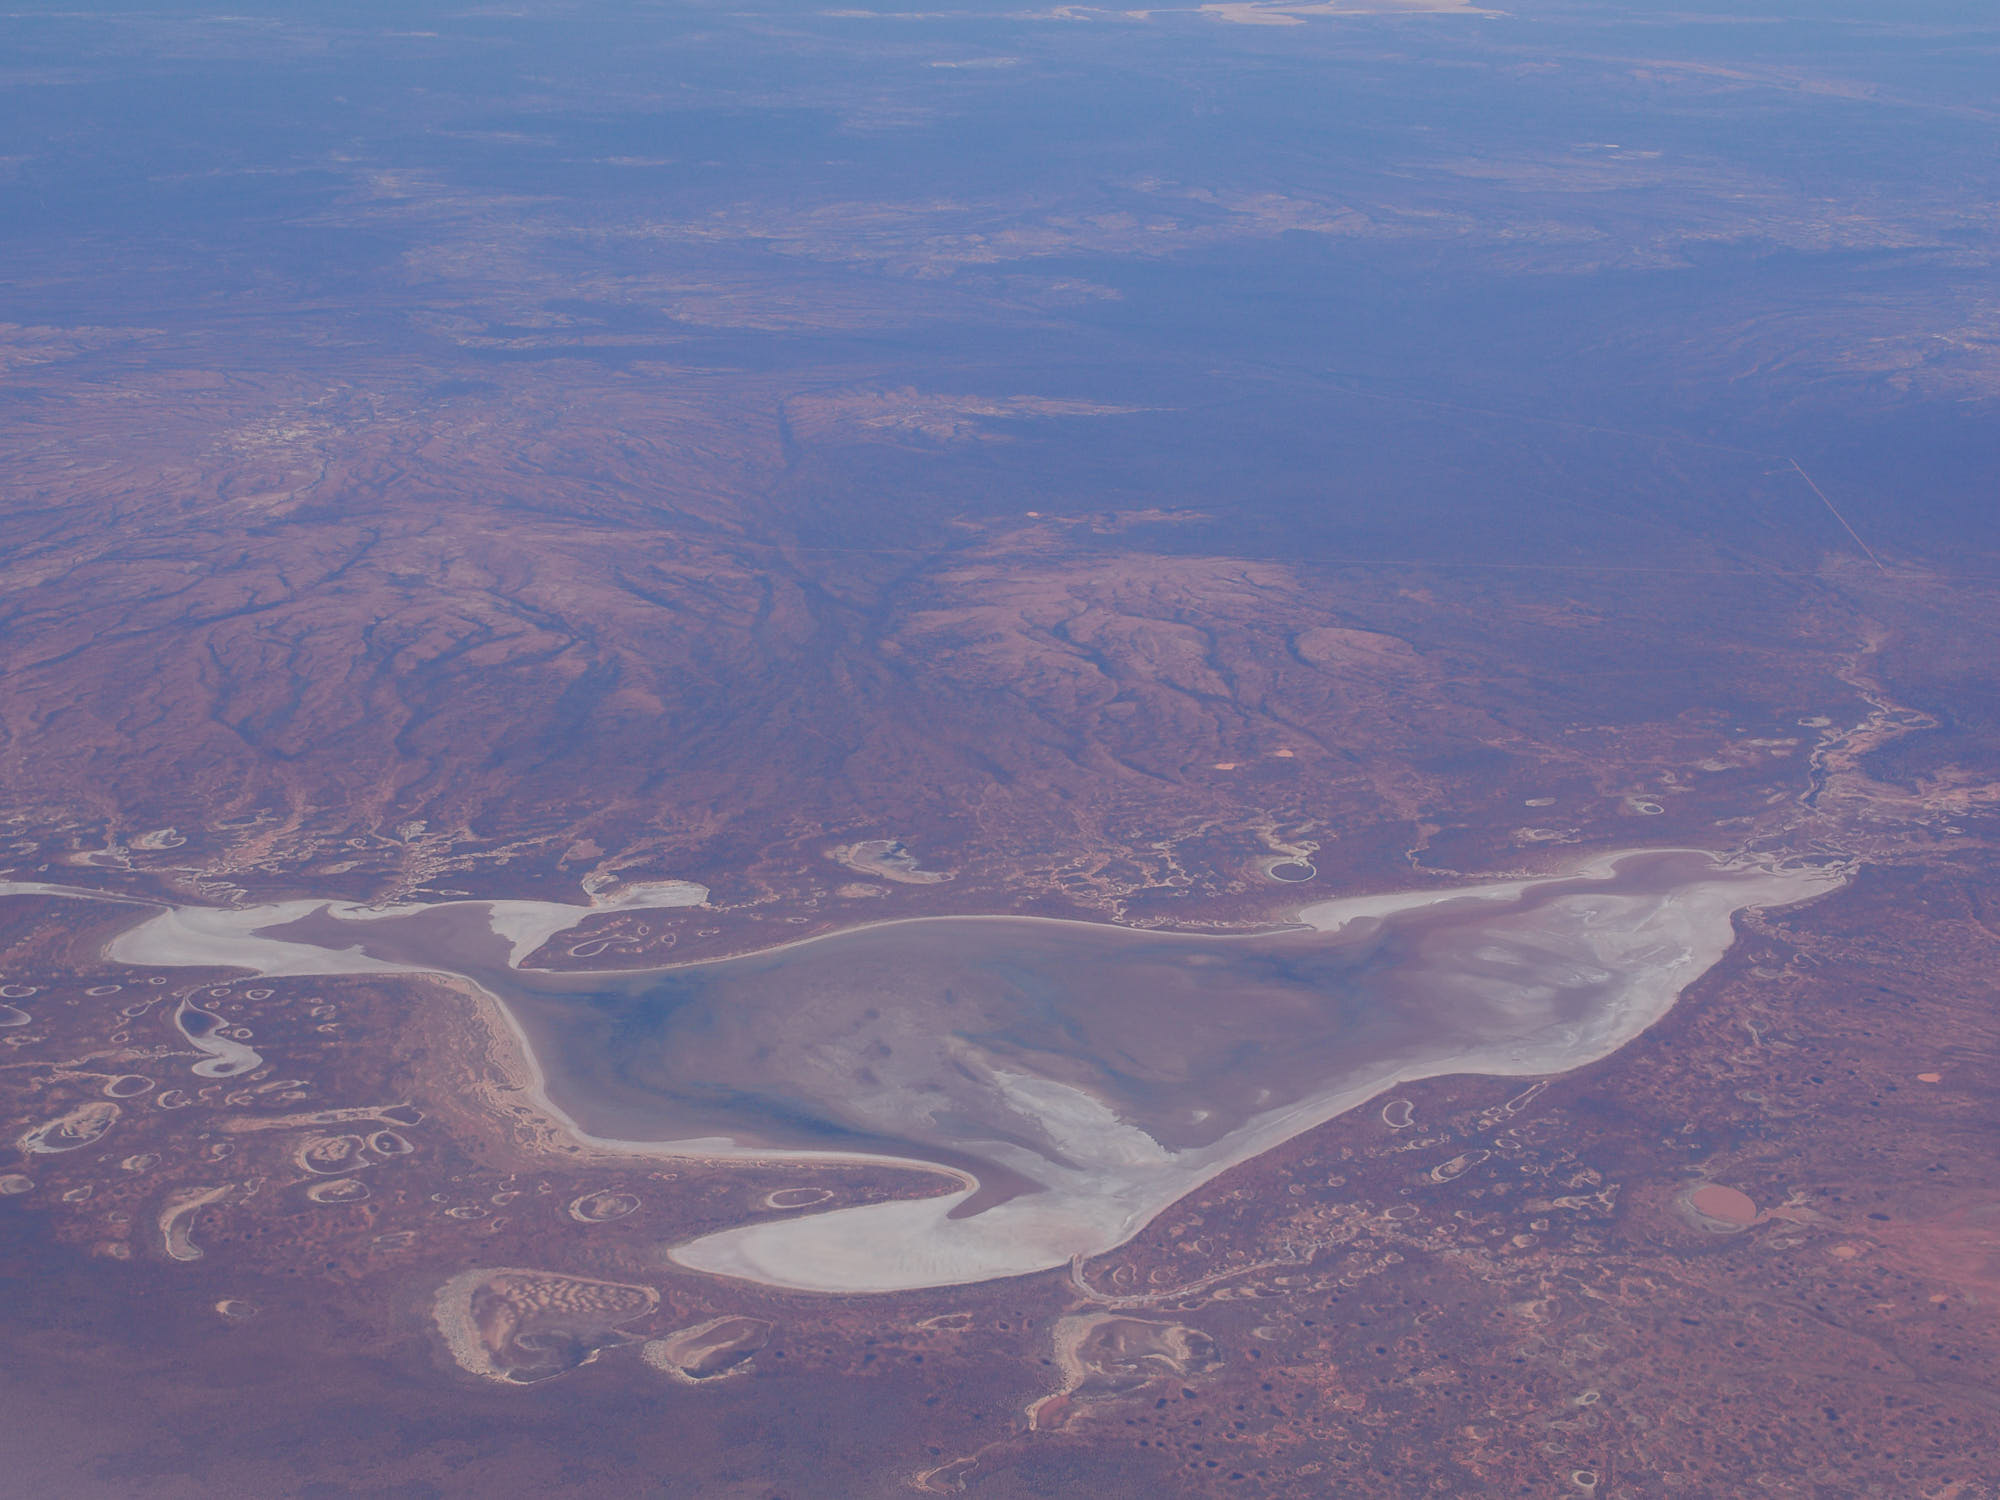 A view near Borodale Creek, Australia. The combination of airplane window plus atmospheric haze produced a very low contrast image with colour casts